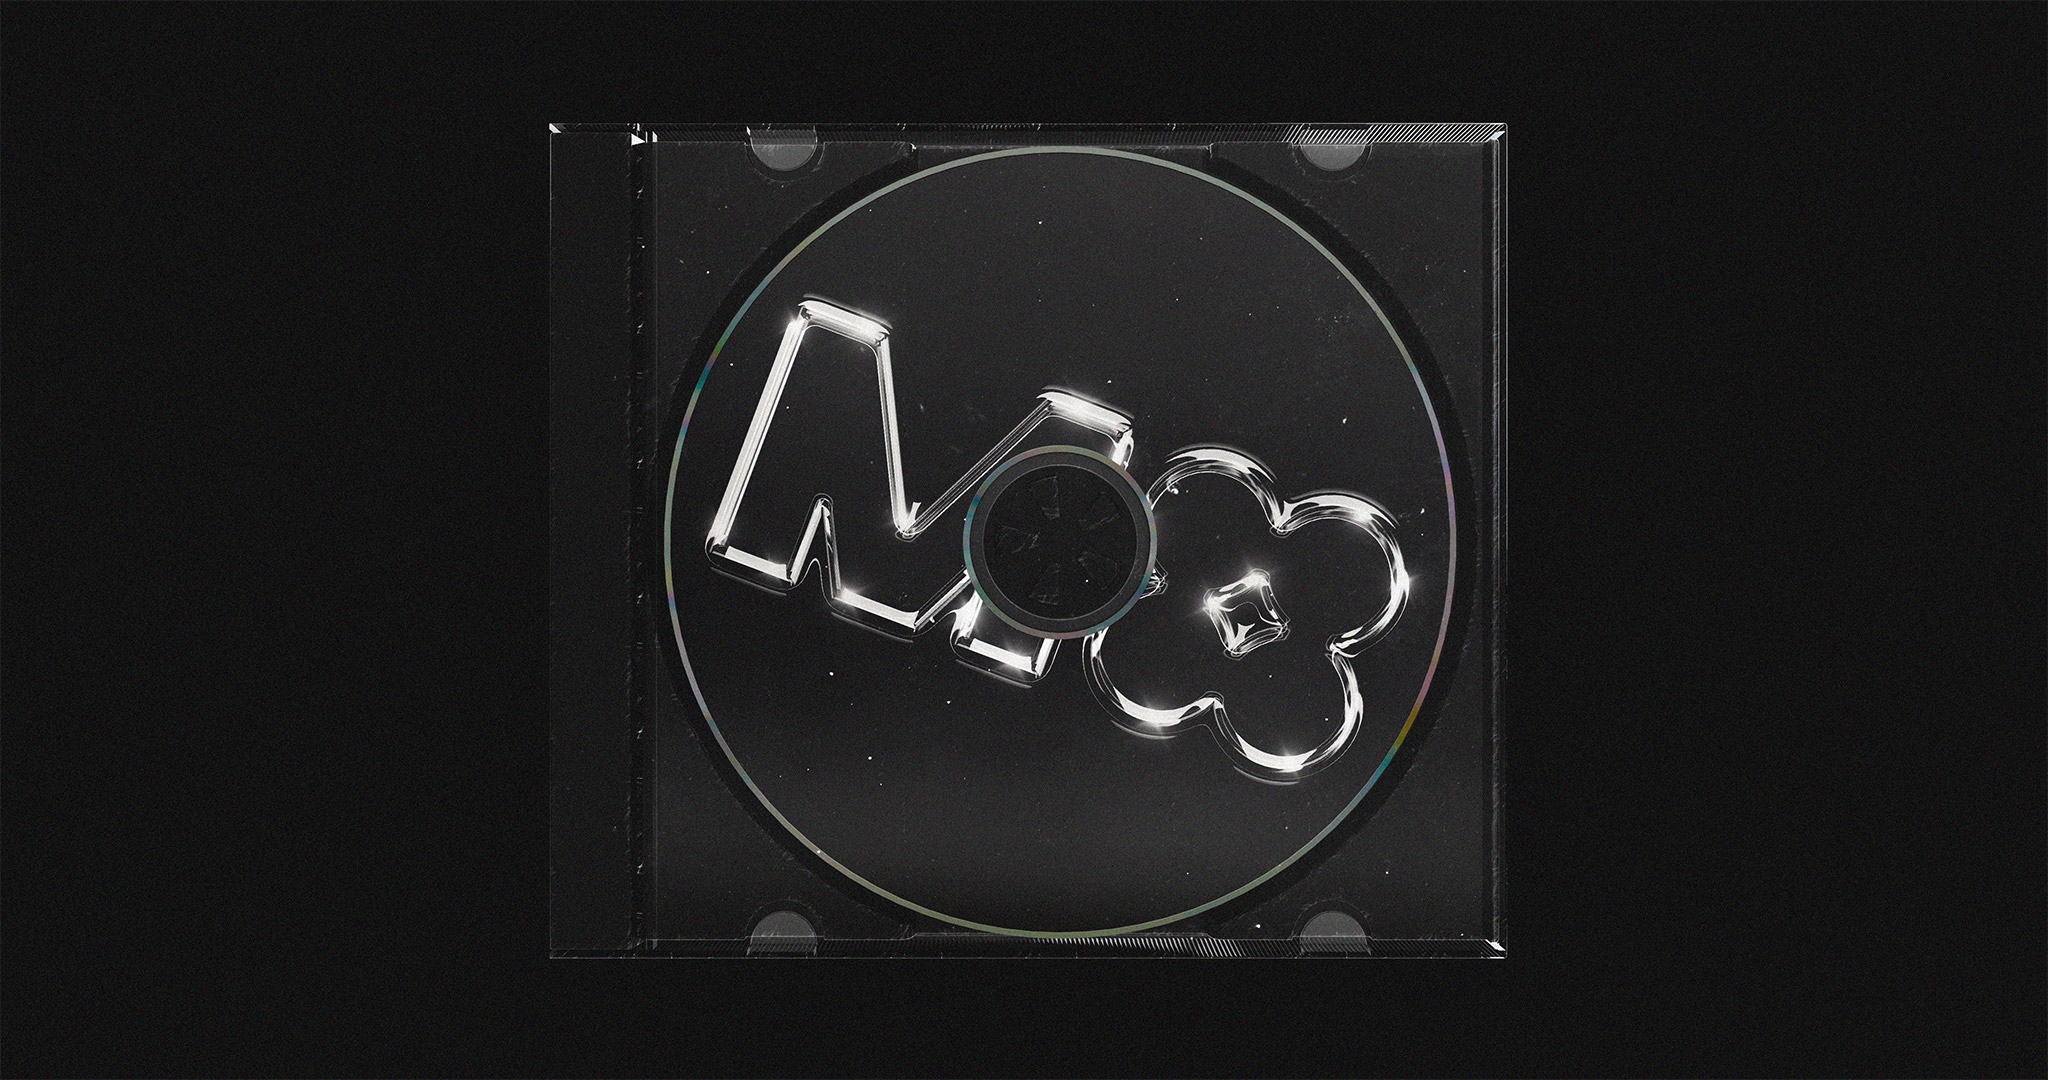 A photographic mockup of a stylized, chrome render of the M4 logotype printed on a compact disc (CD), inside a CD case.